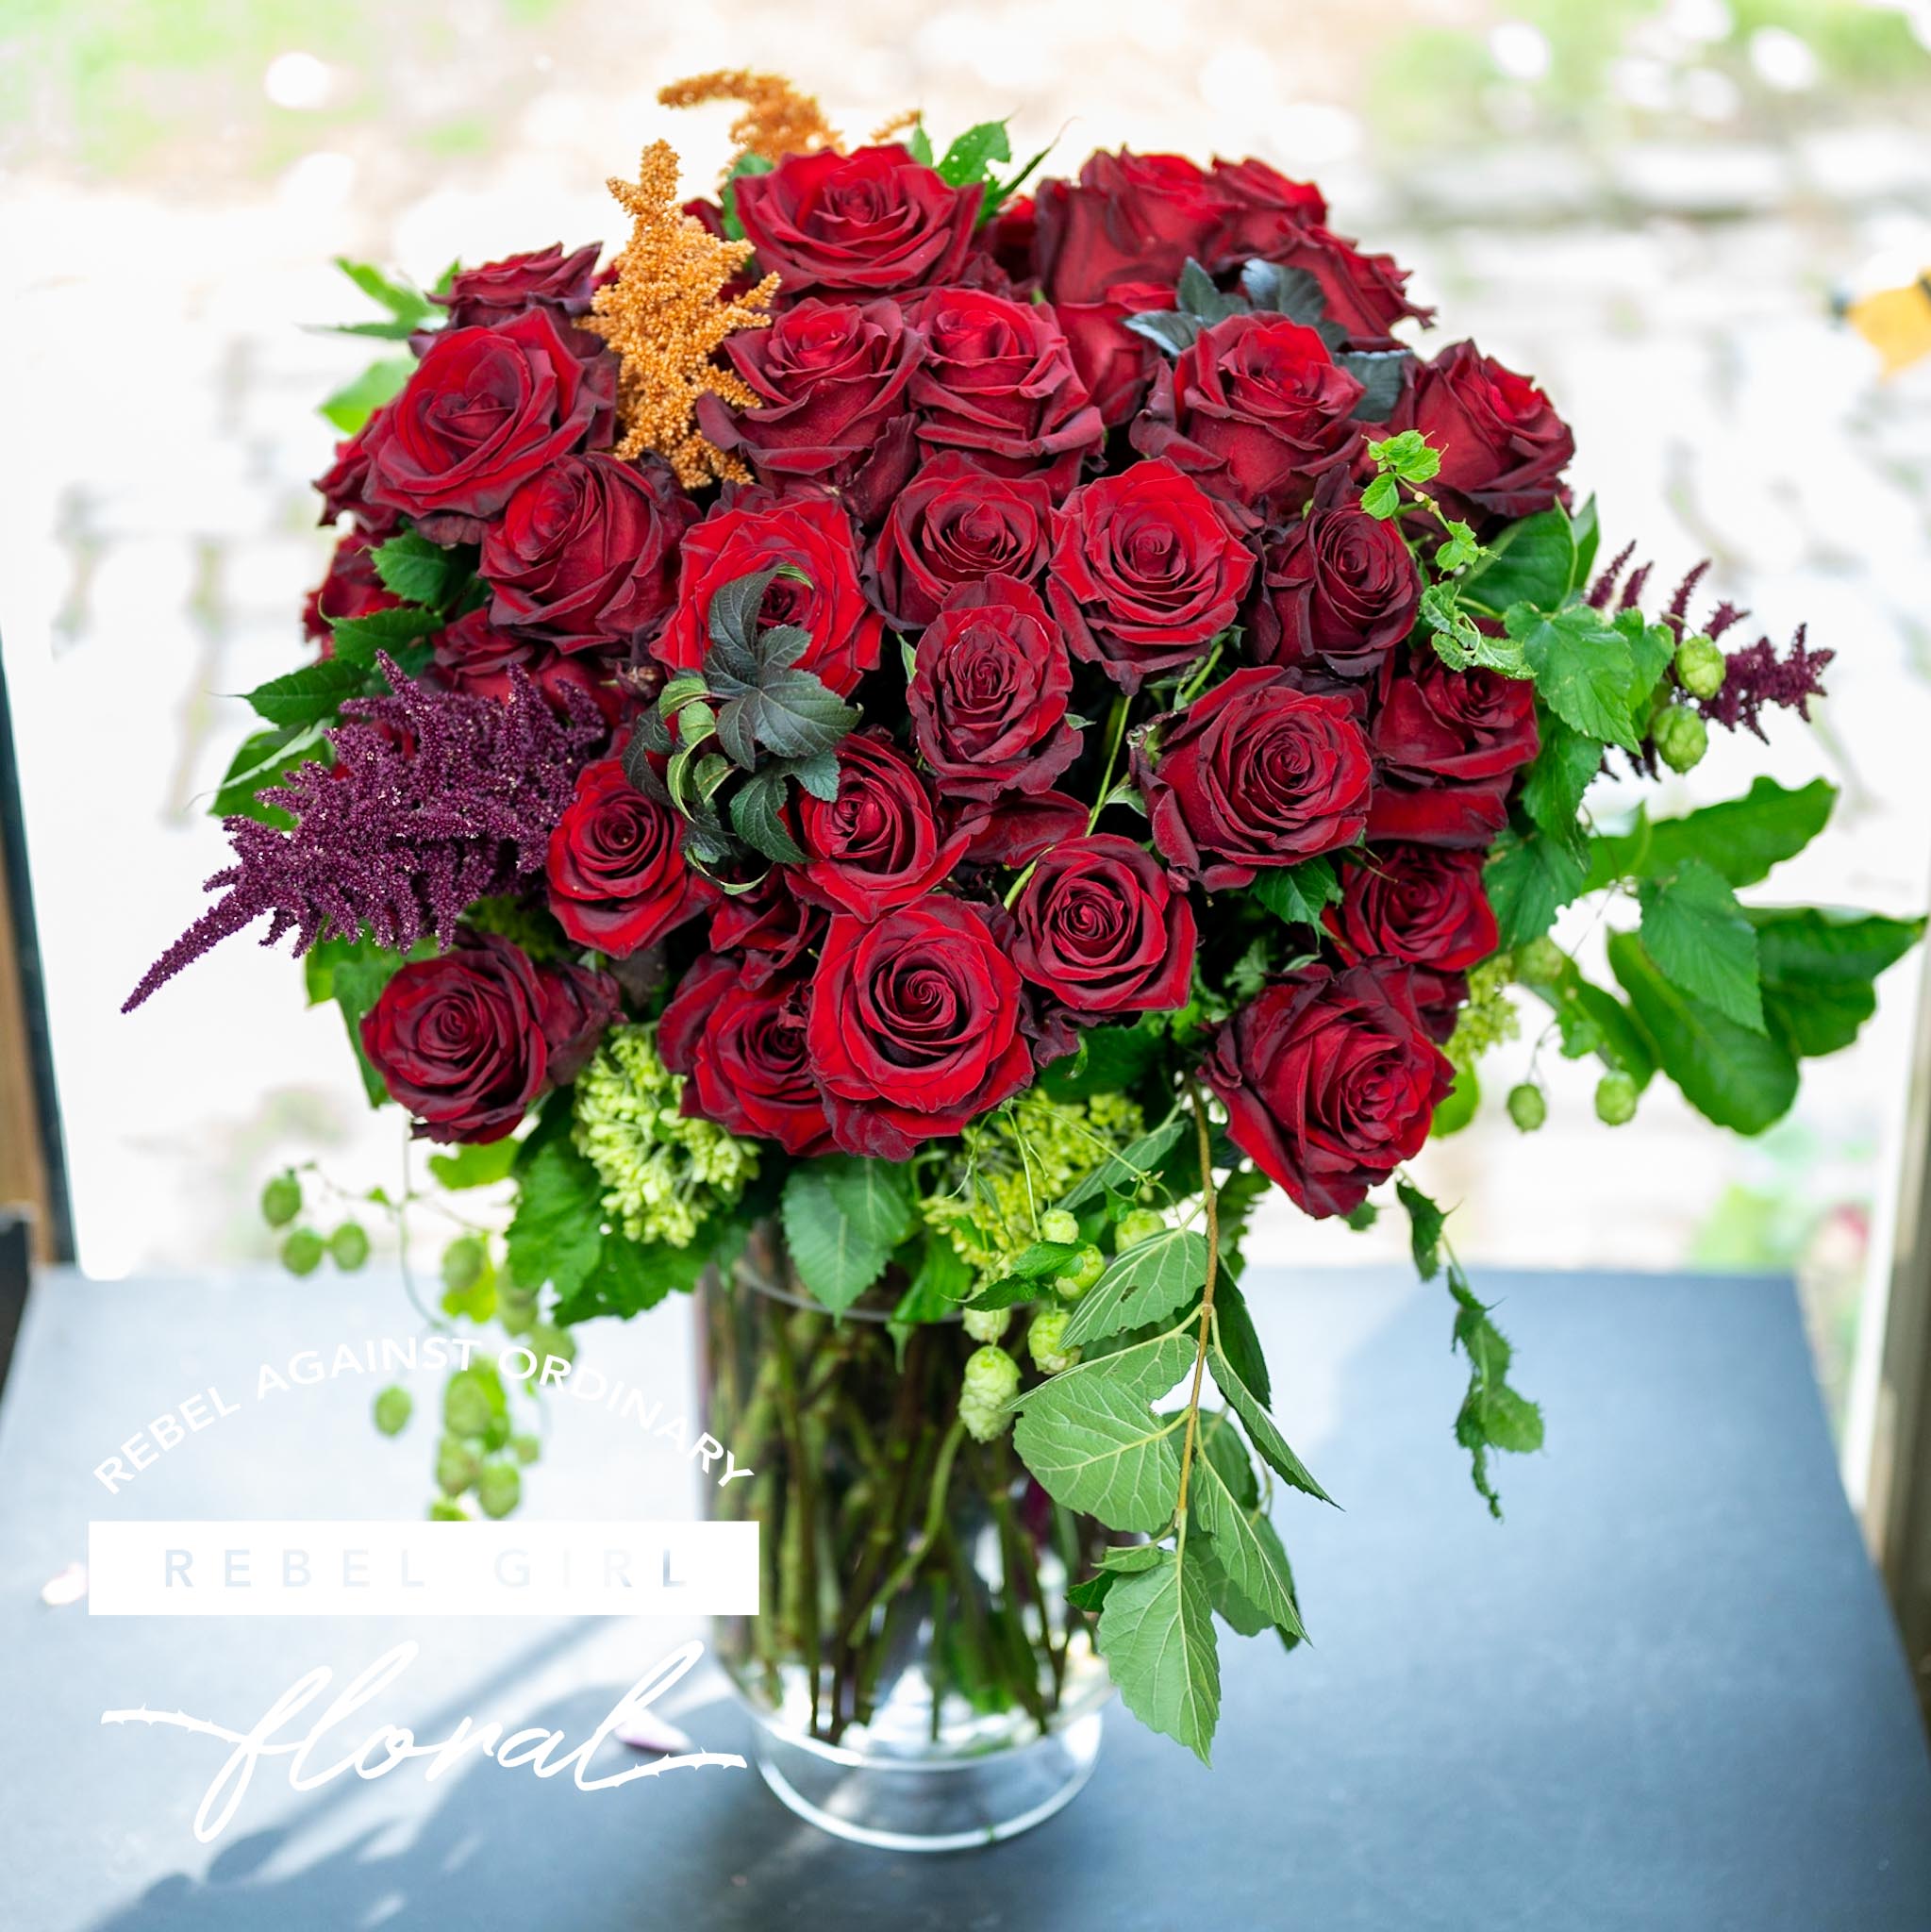 Beautiful bouquet of red roses with unique greens and accents arranged by Rebel Girl Floral